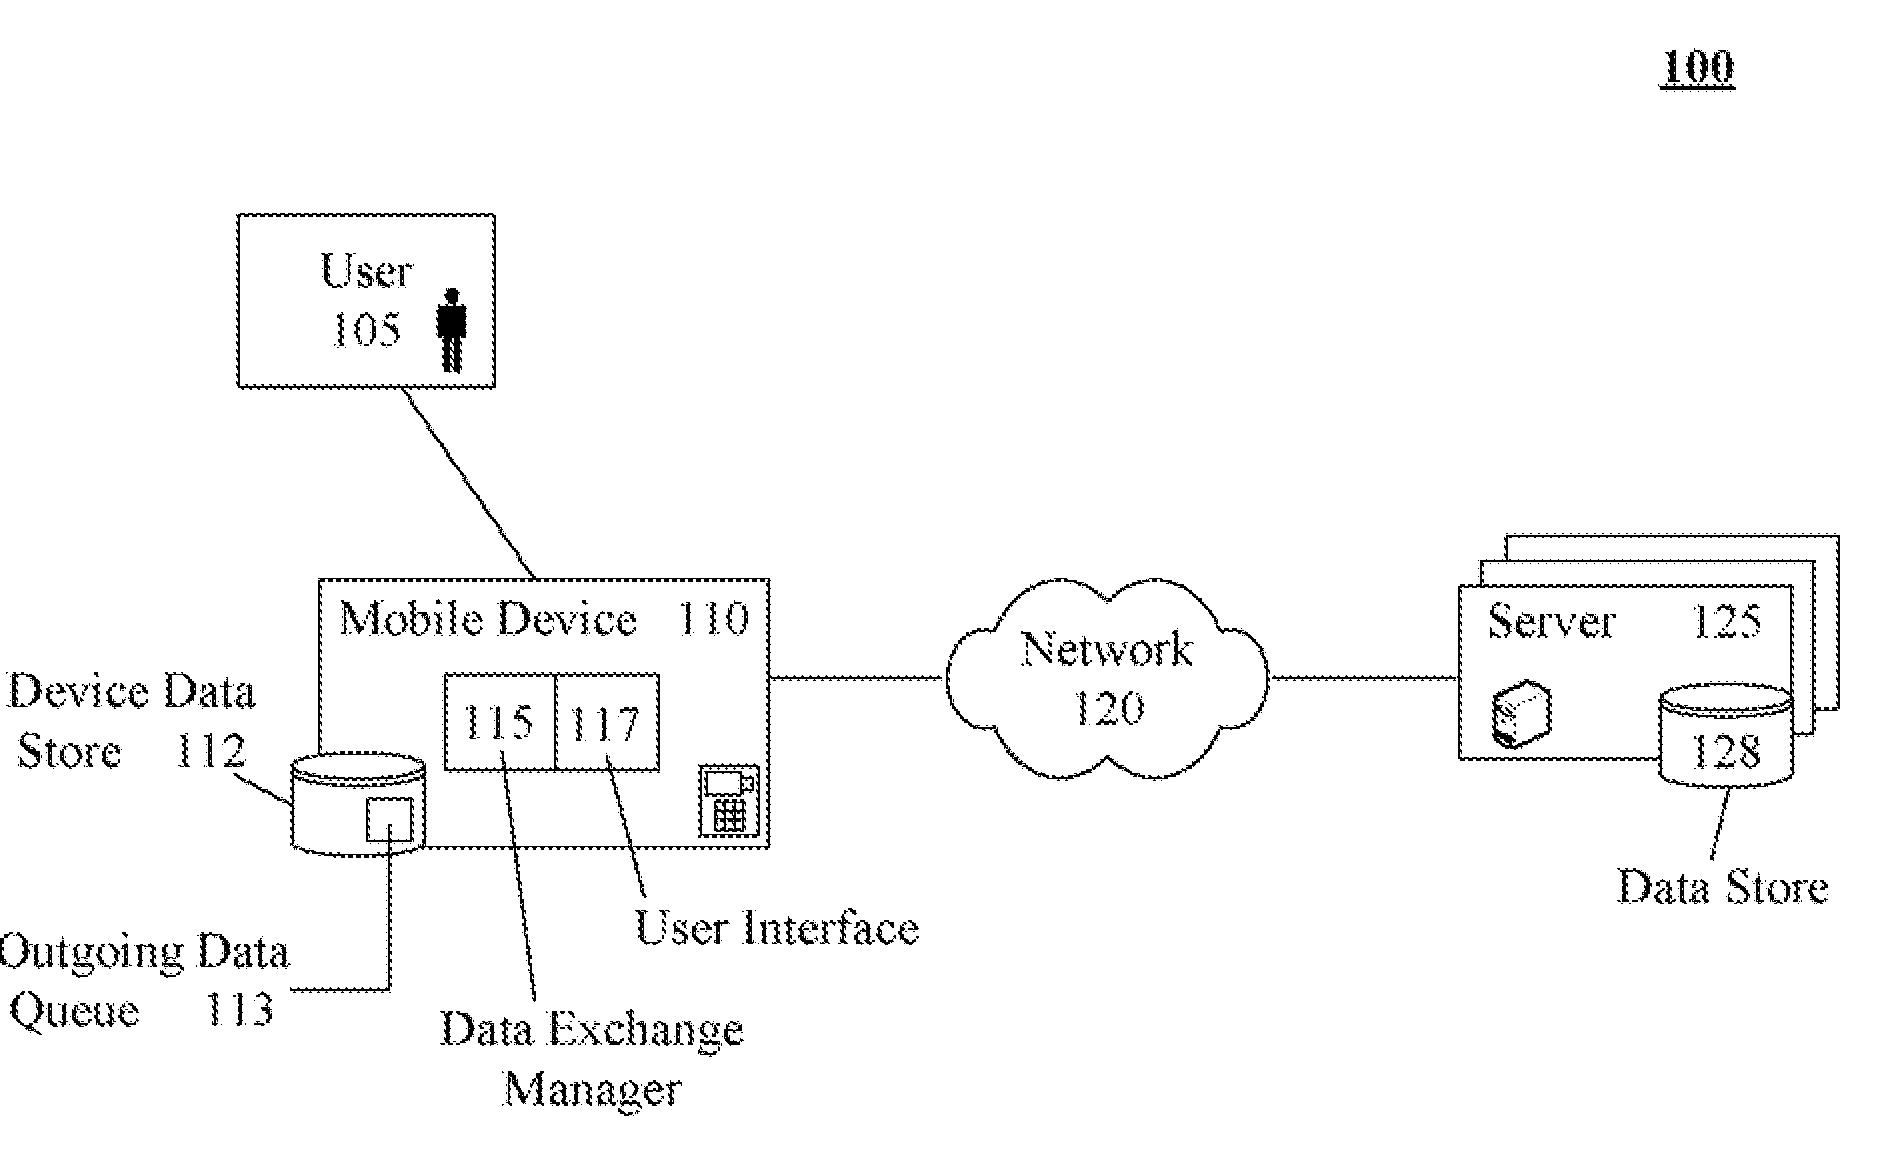 Mobile device solution that provides enhanced user control for outgoing data handling